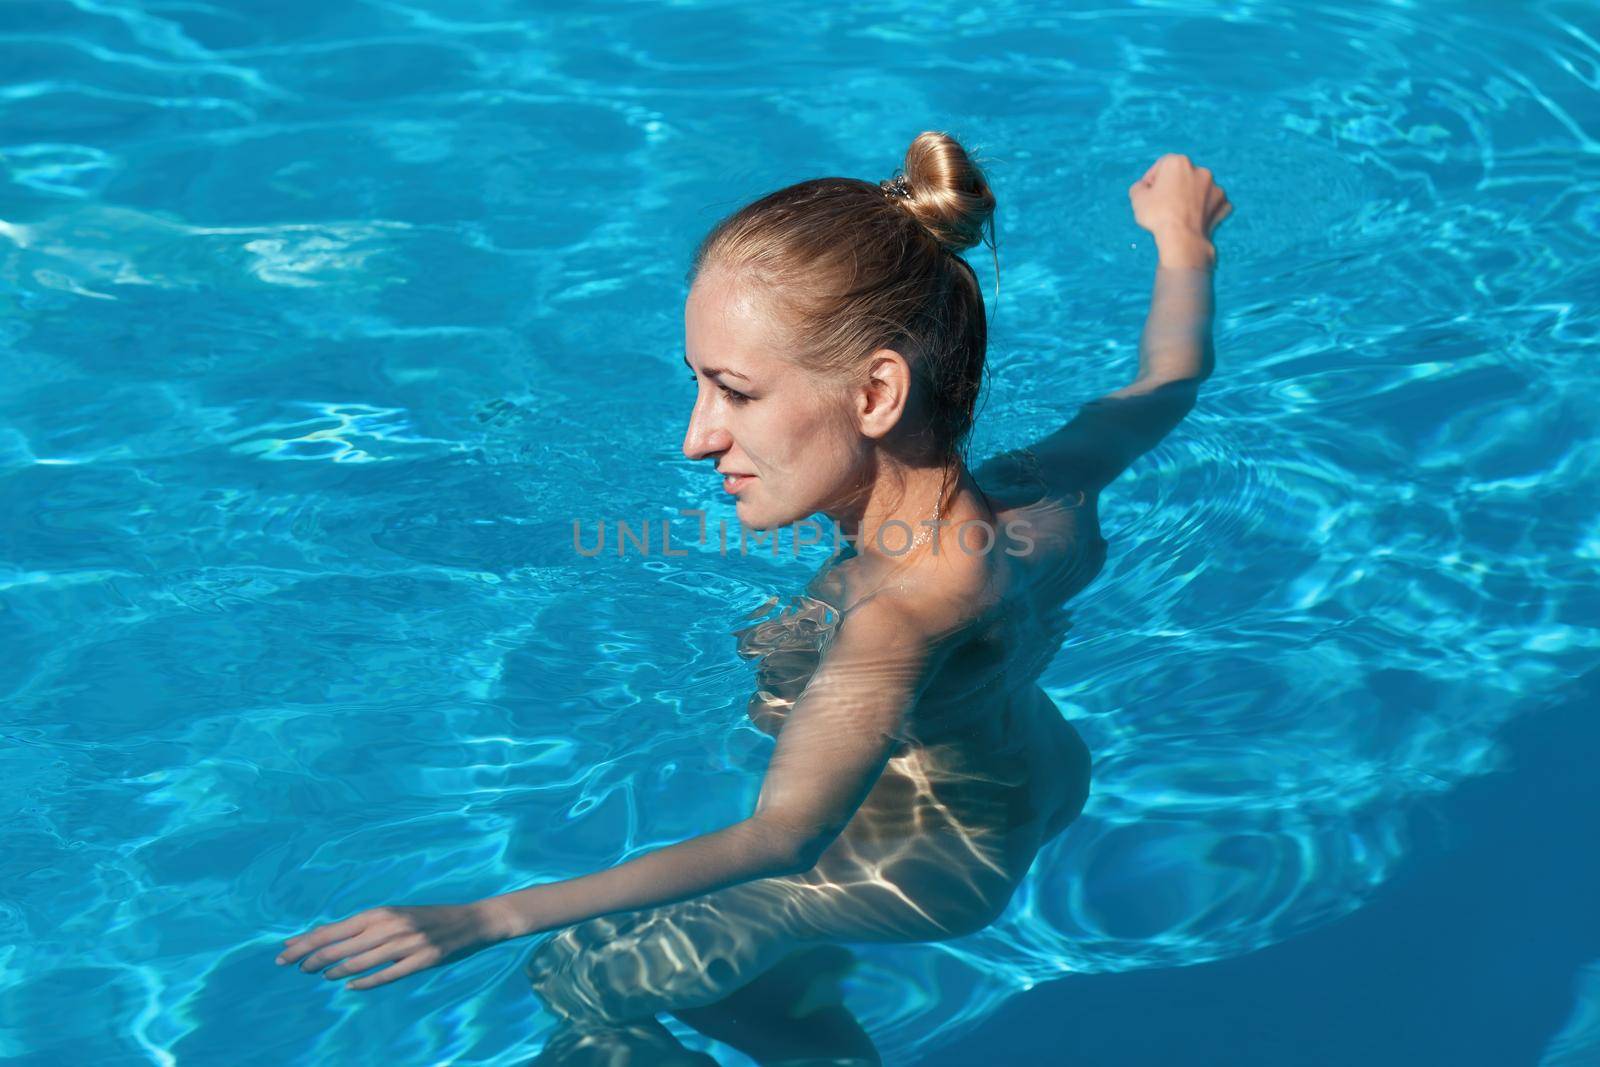 Naked woman outdoors. Beautiful young nude woman in swimming pool. Young nude blonde swims in the outdoor pool